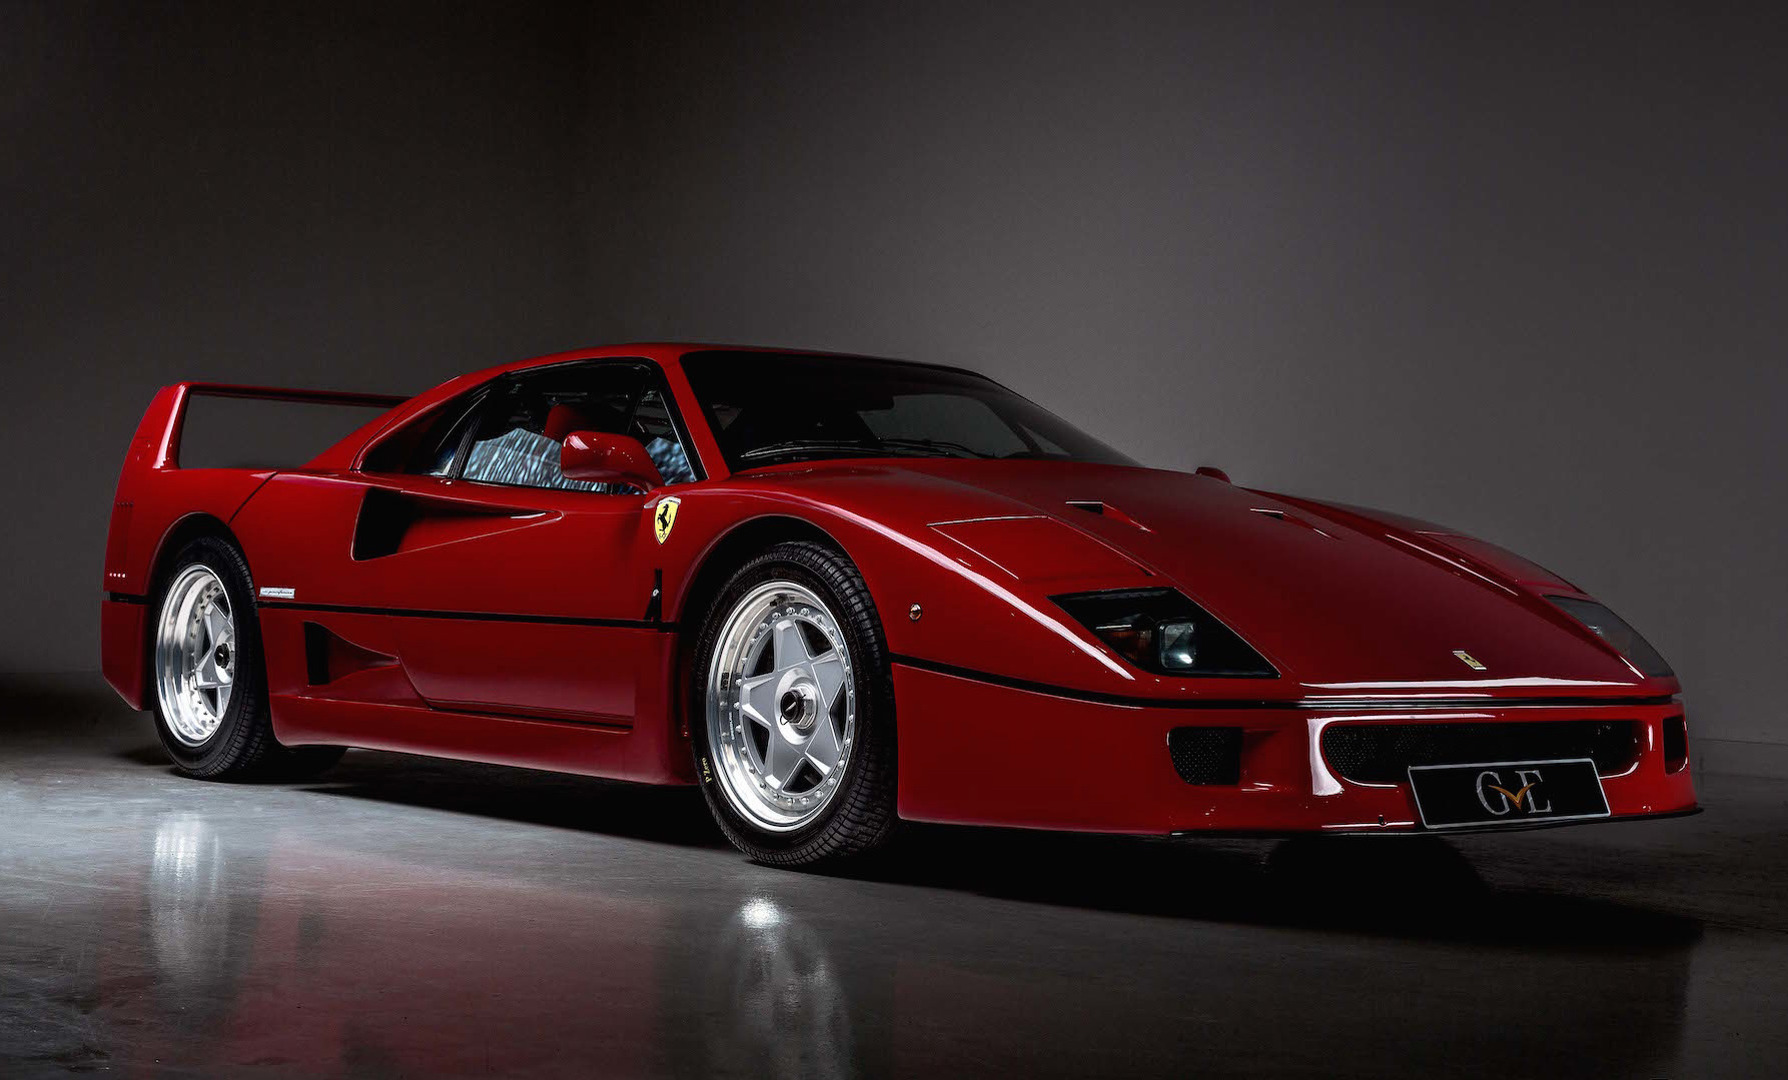 For Sale: 1991 Ferrari F40 owned by Eric Clapton